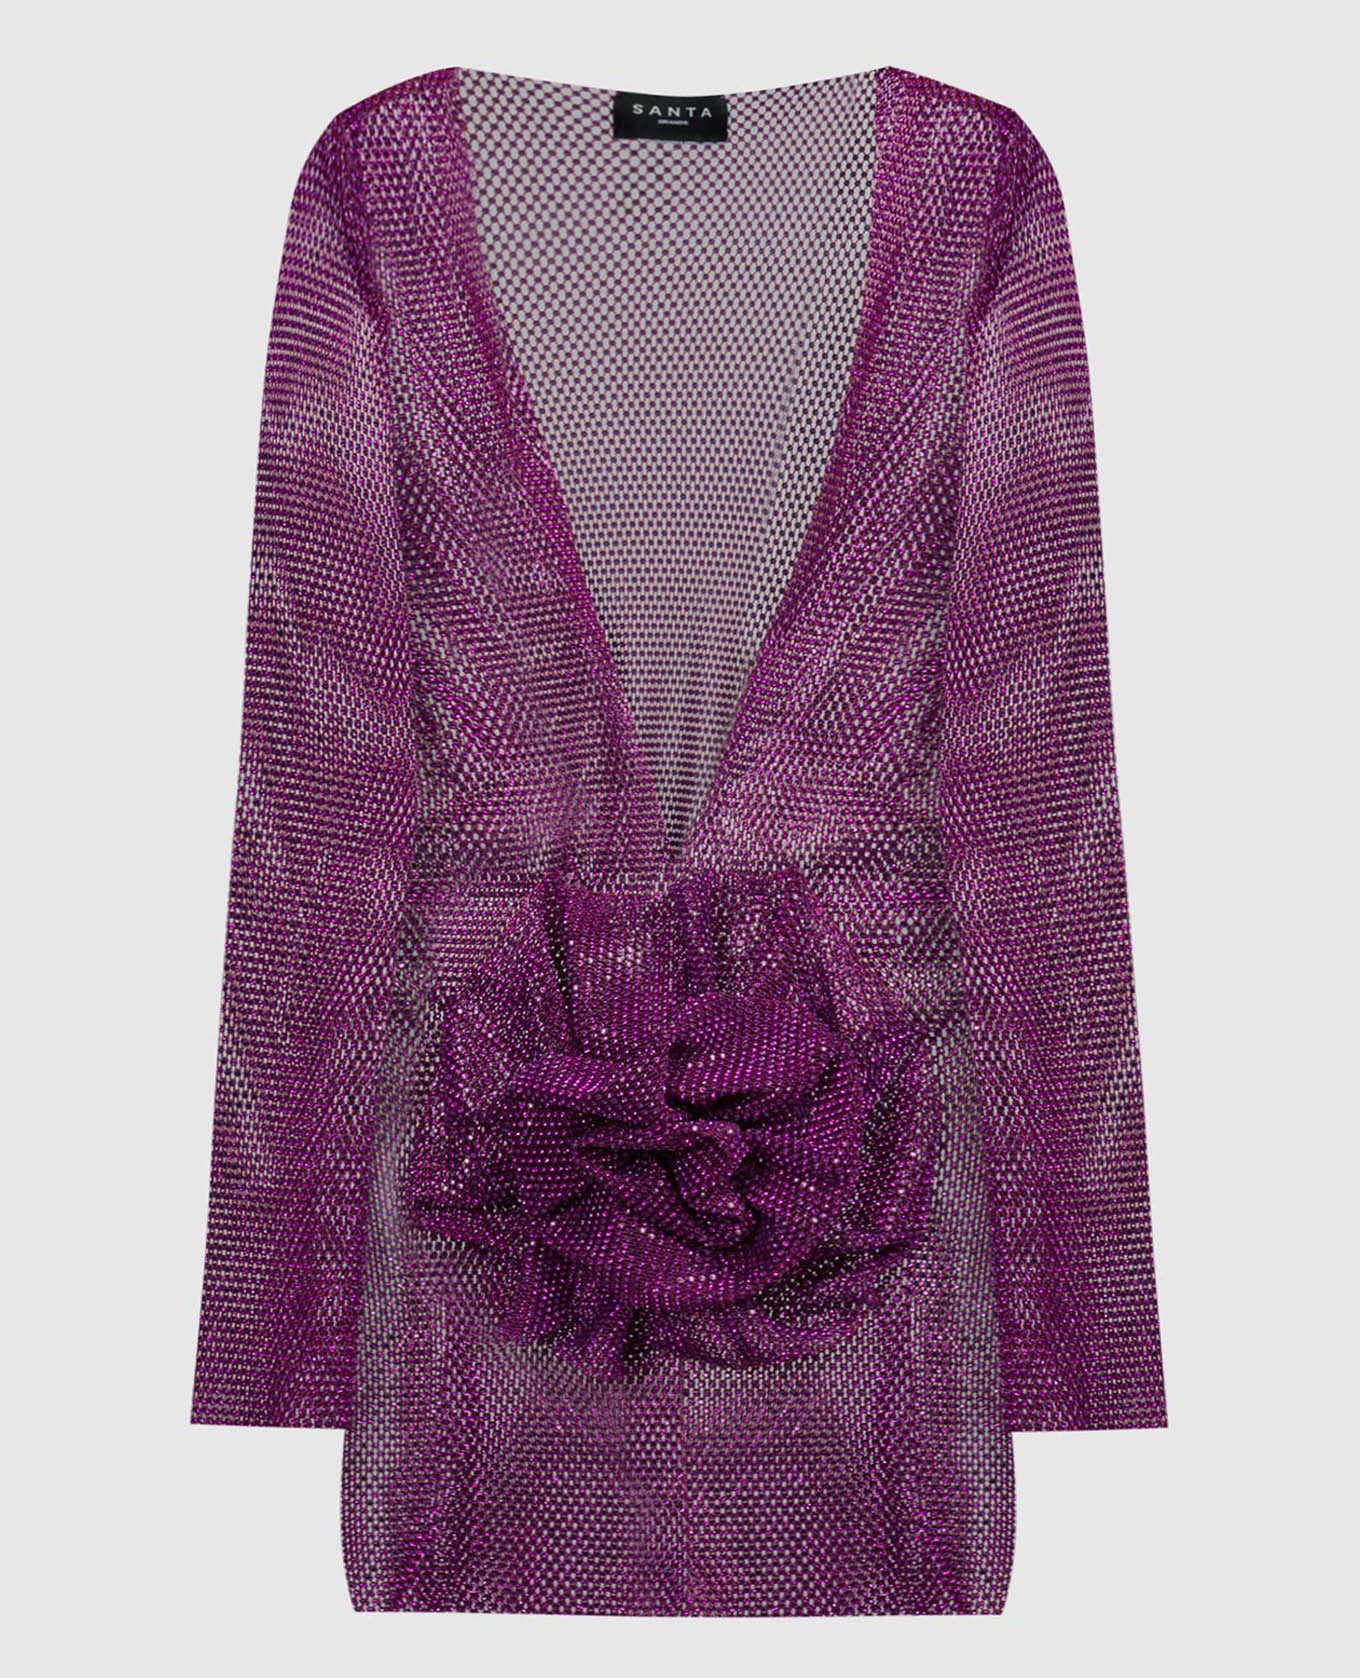 Purple mini dress with crystals and appliqué in the form of a flower